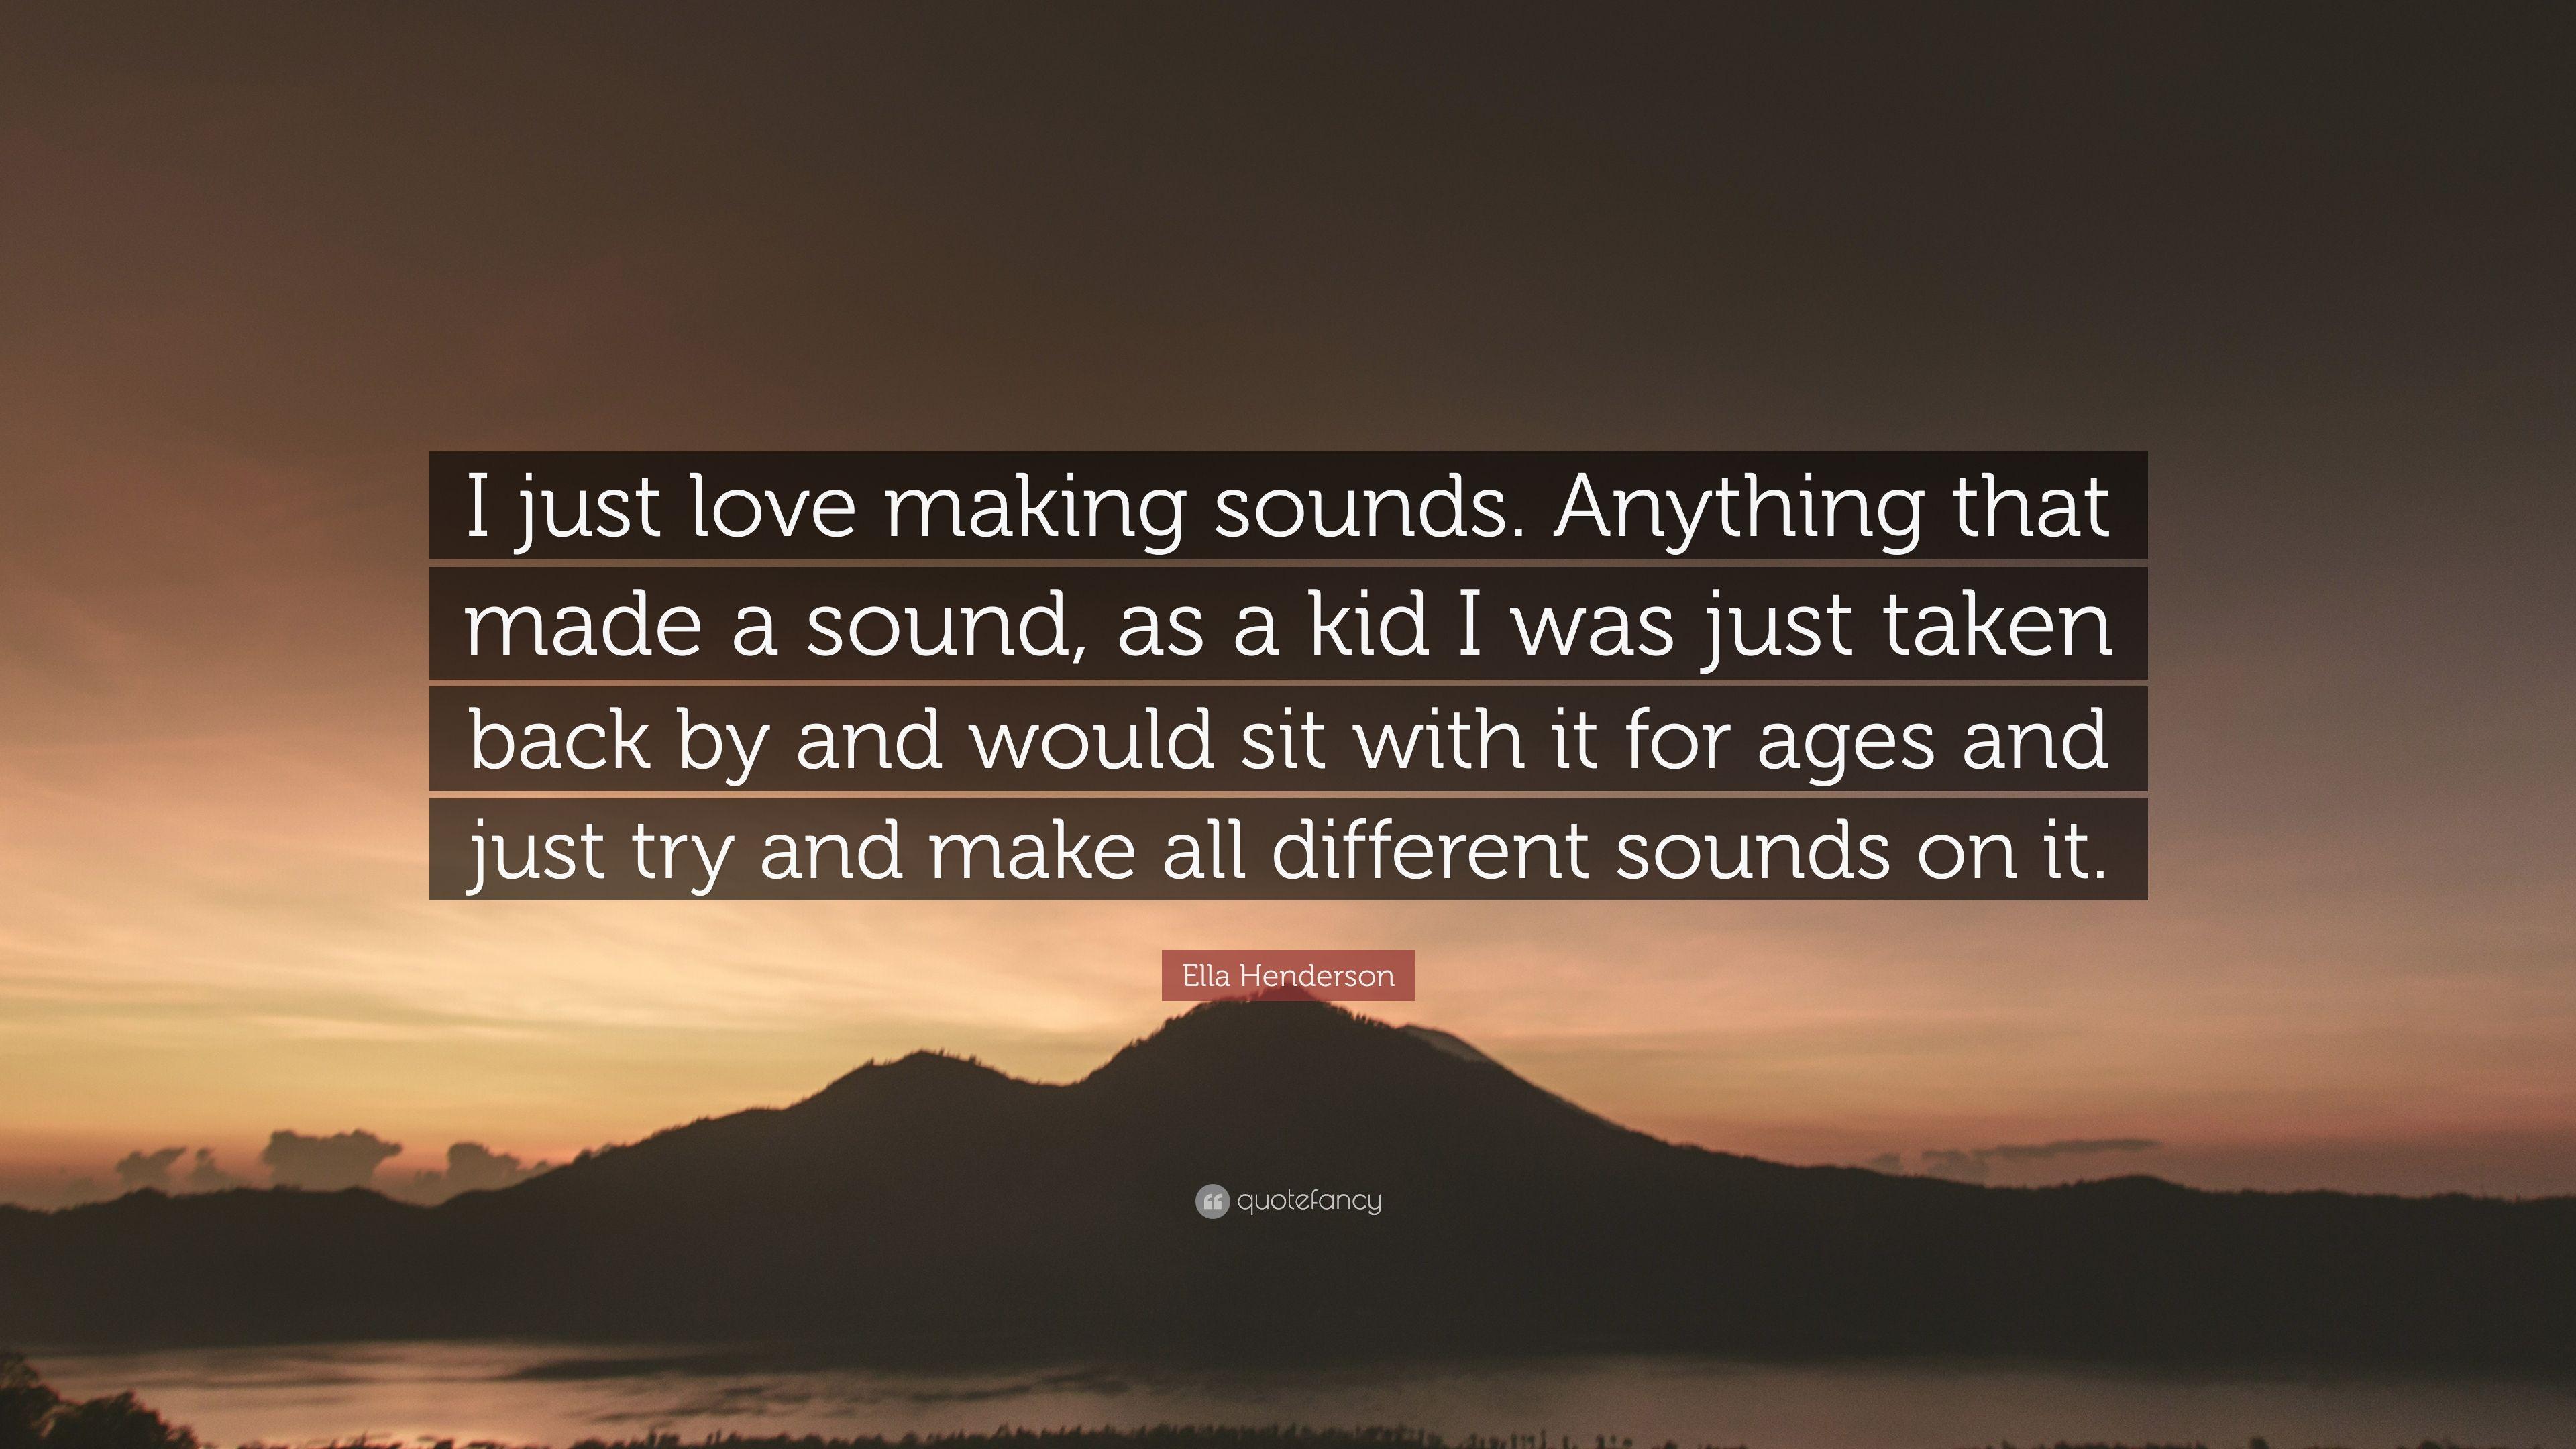 Ella Henderson Quote: “I just love making sounds. Anything